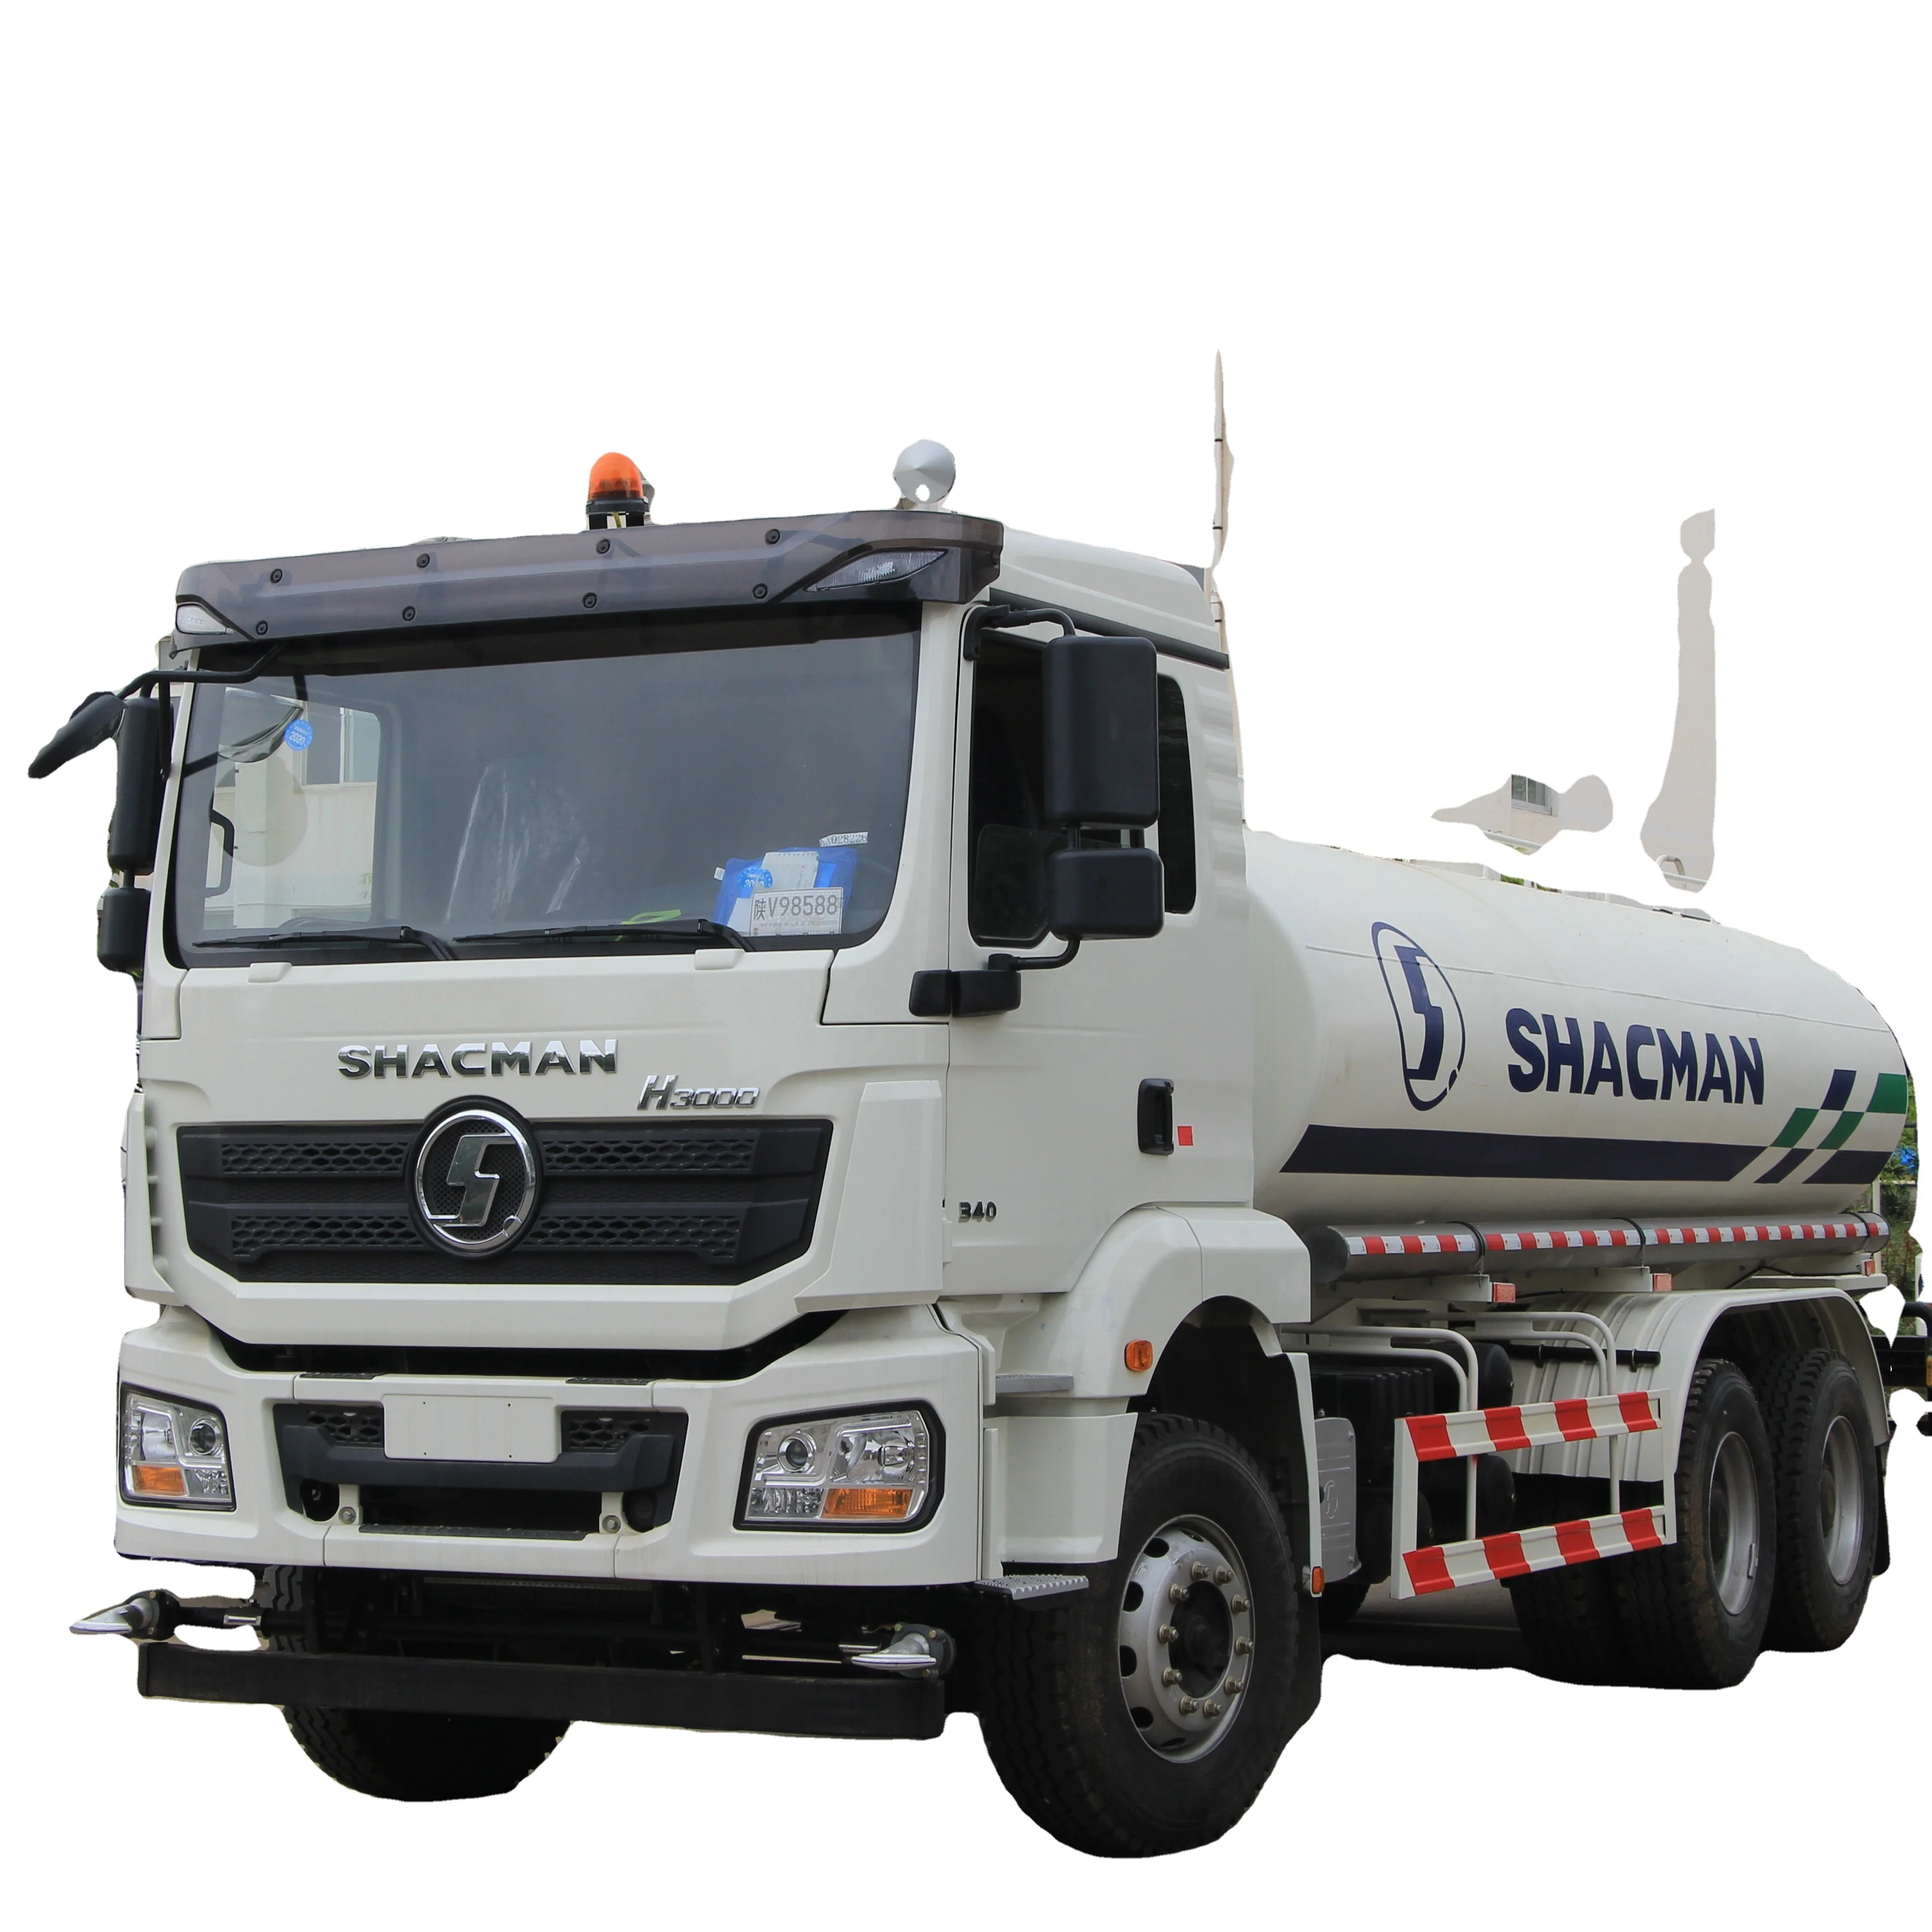 2021 model shacman H3000 6x4 water tank truck 15000L for sale (1600230626654)